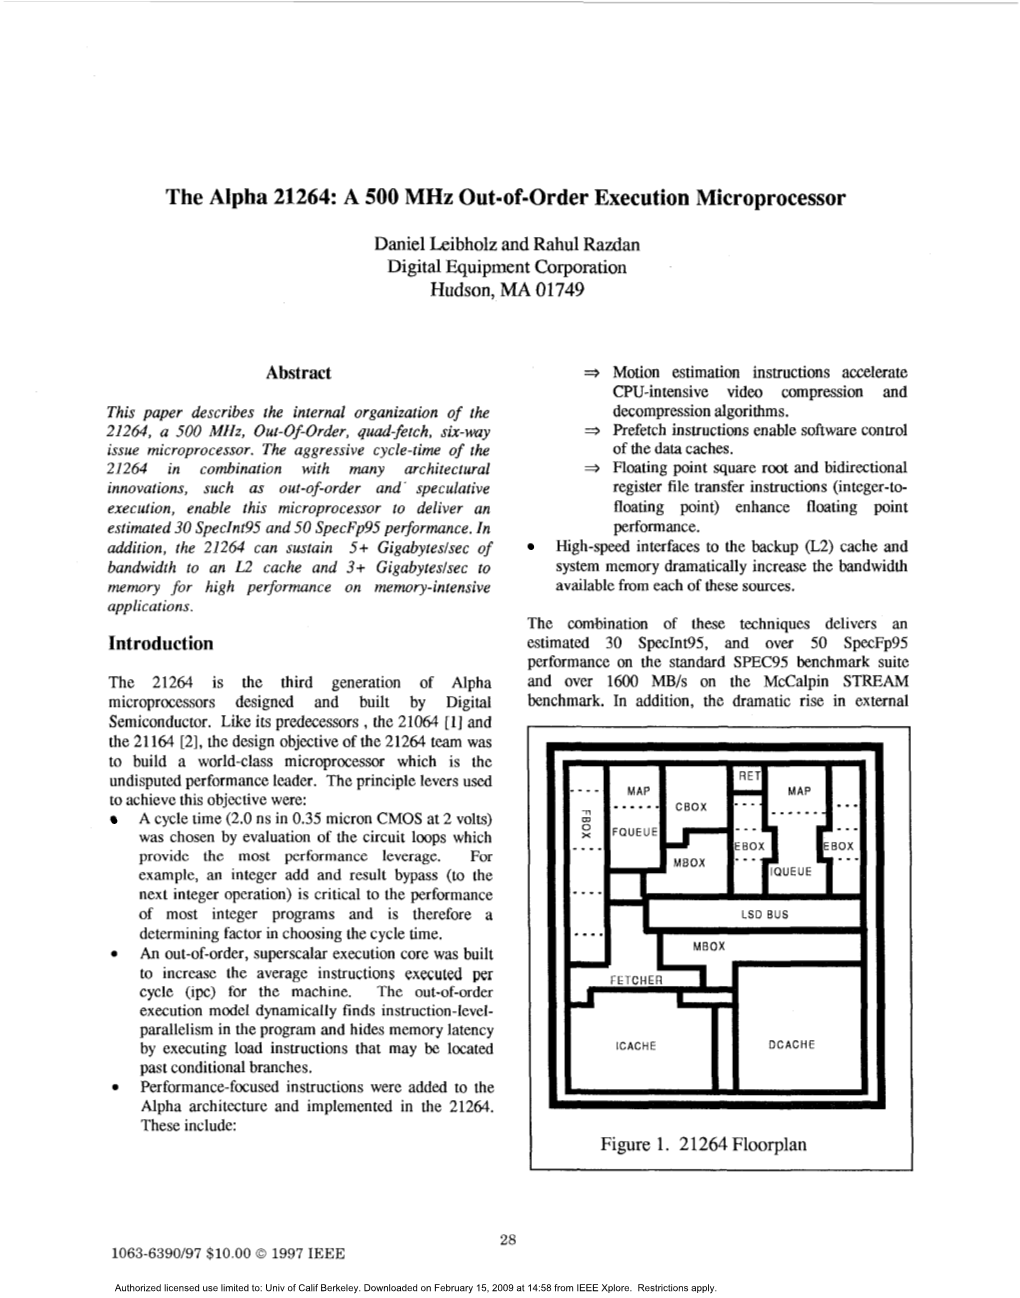 The Alpha 21264: a 500 Mhz Out-Of-Order Execution Microprocessor